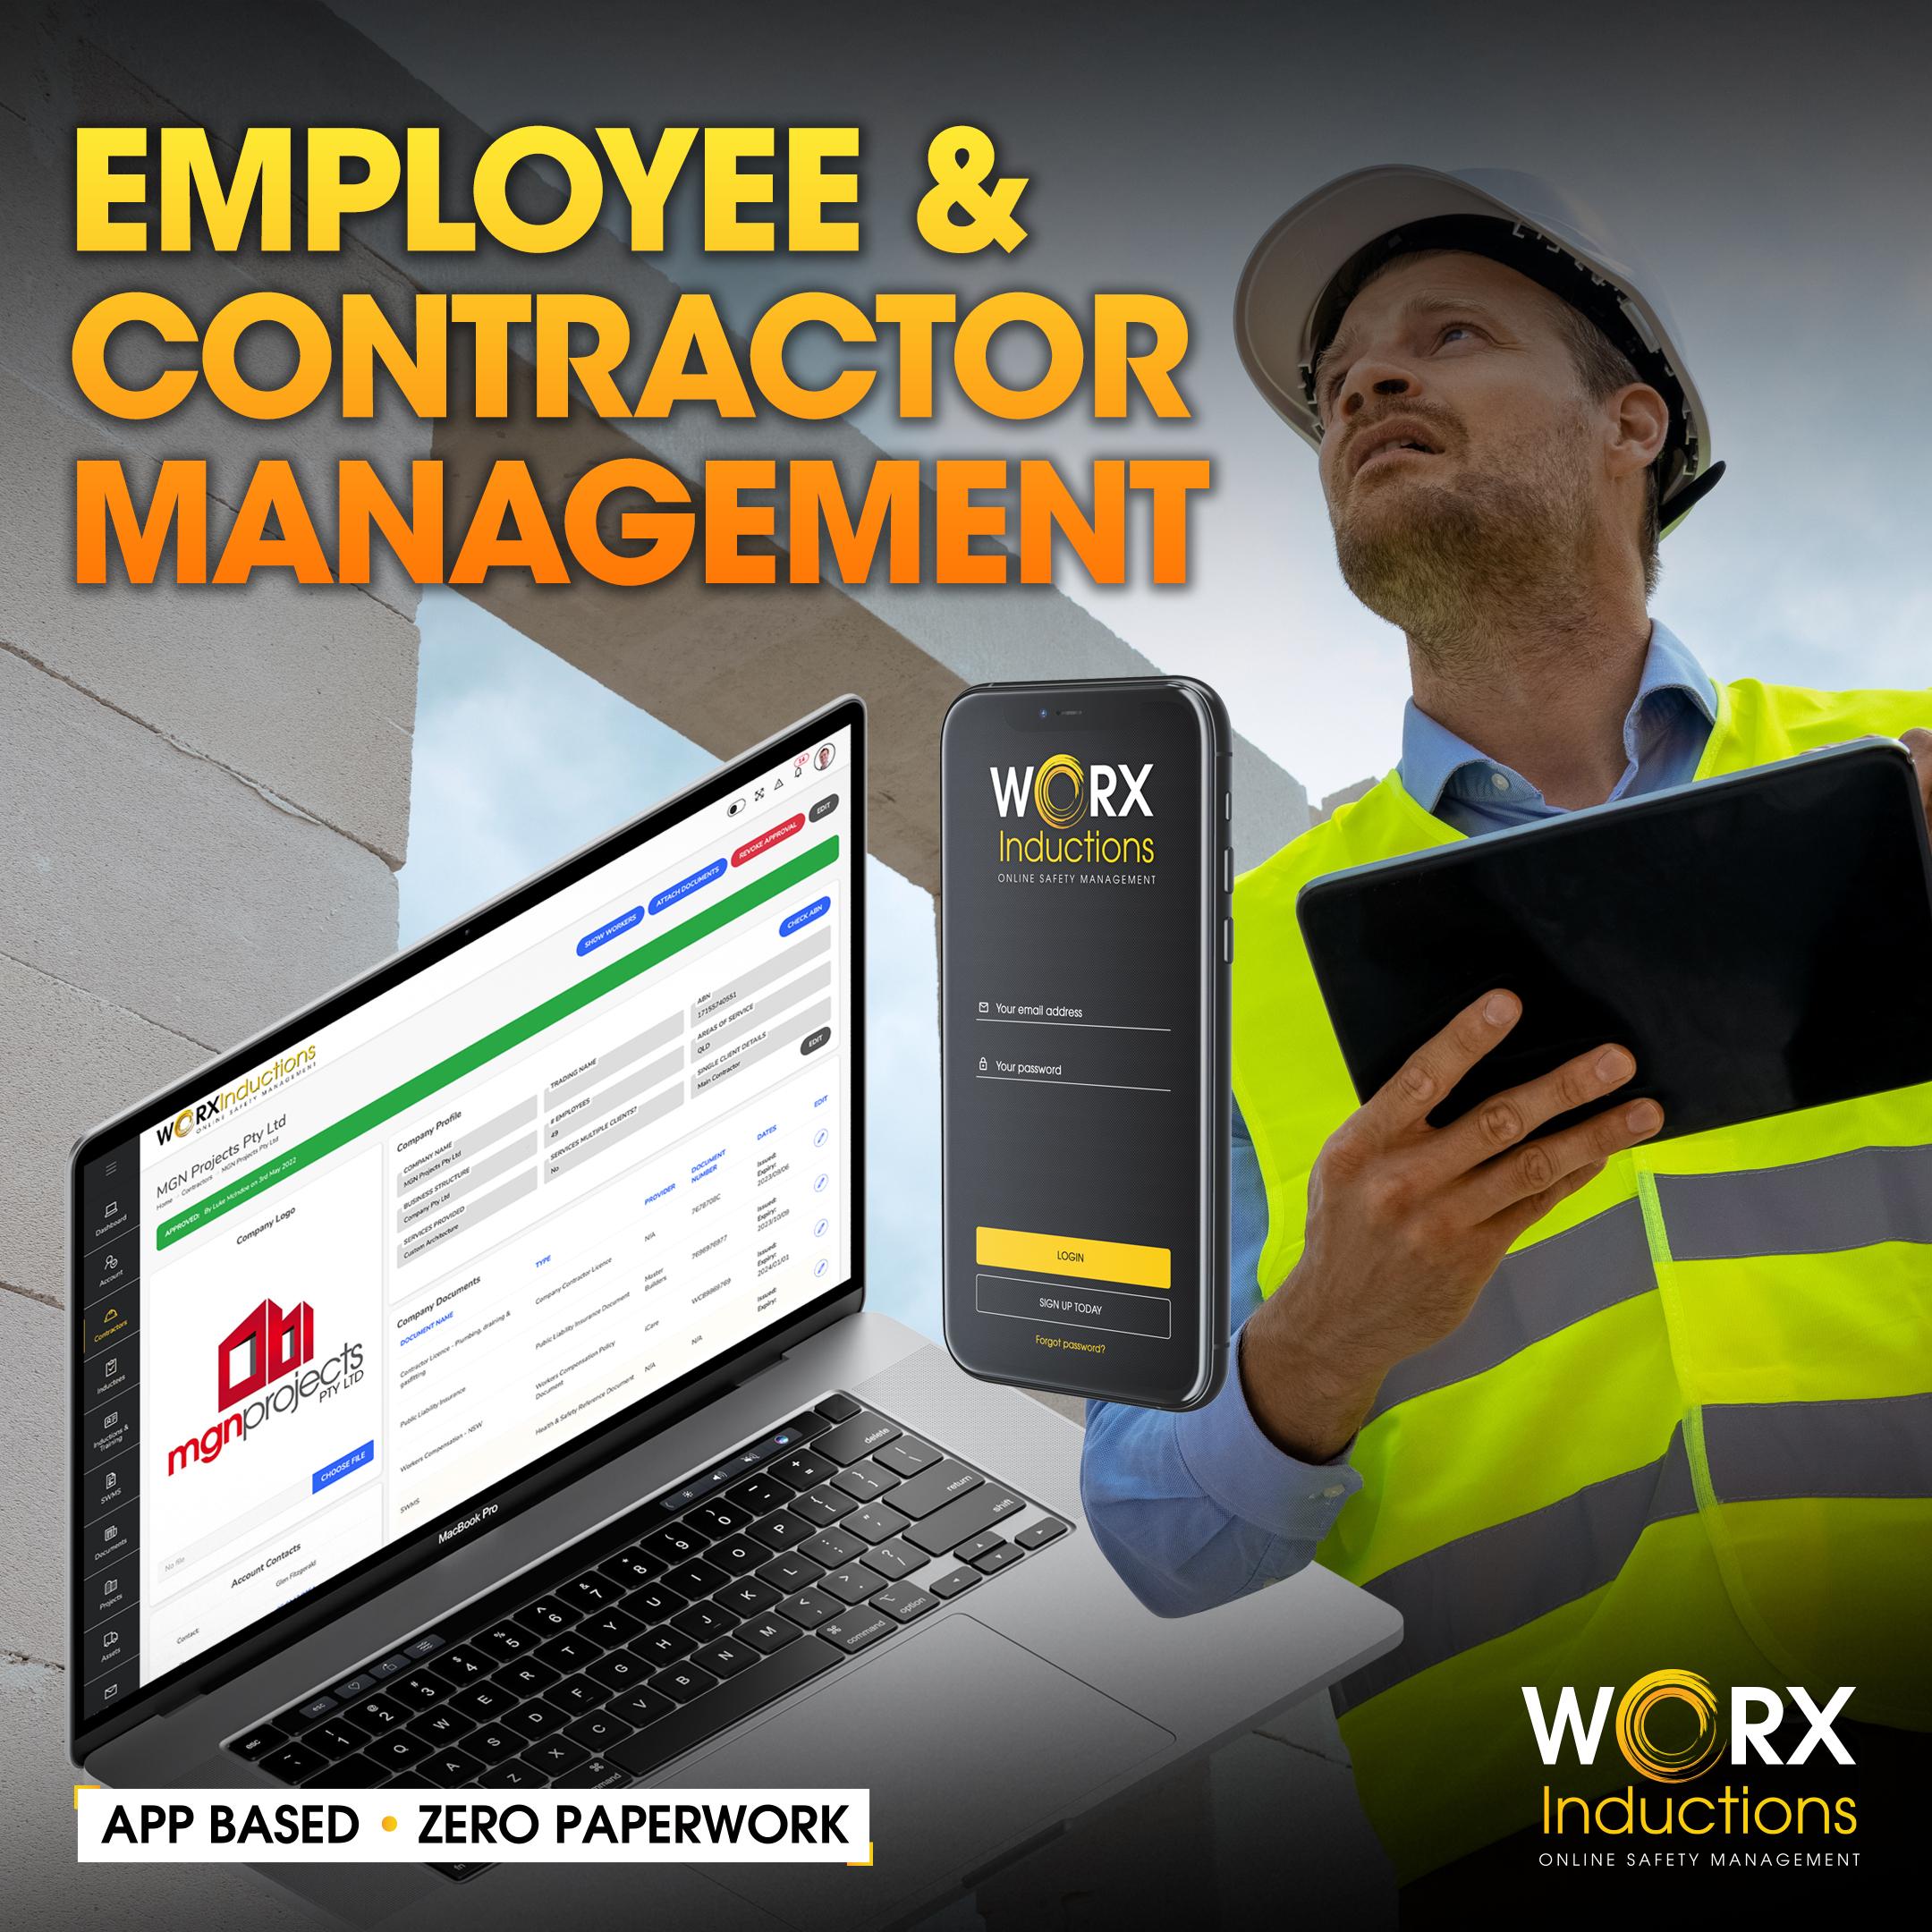 Worksite Safety Software - Employee & Contractor Management Software